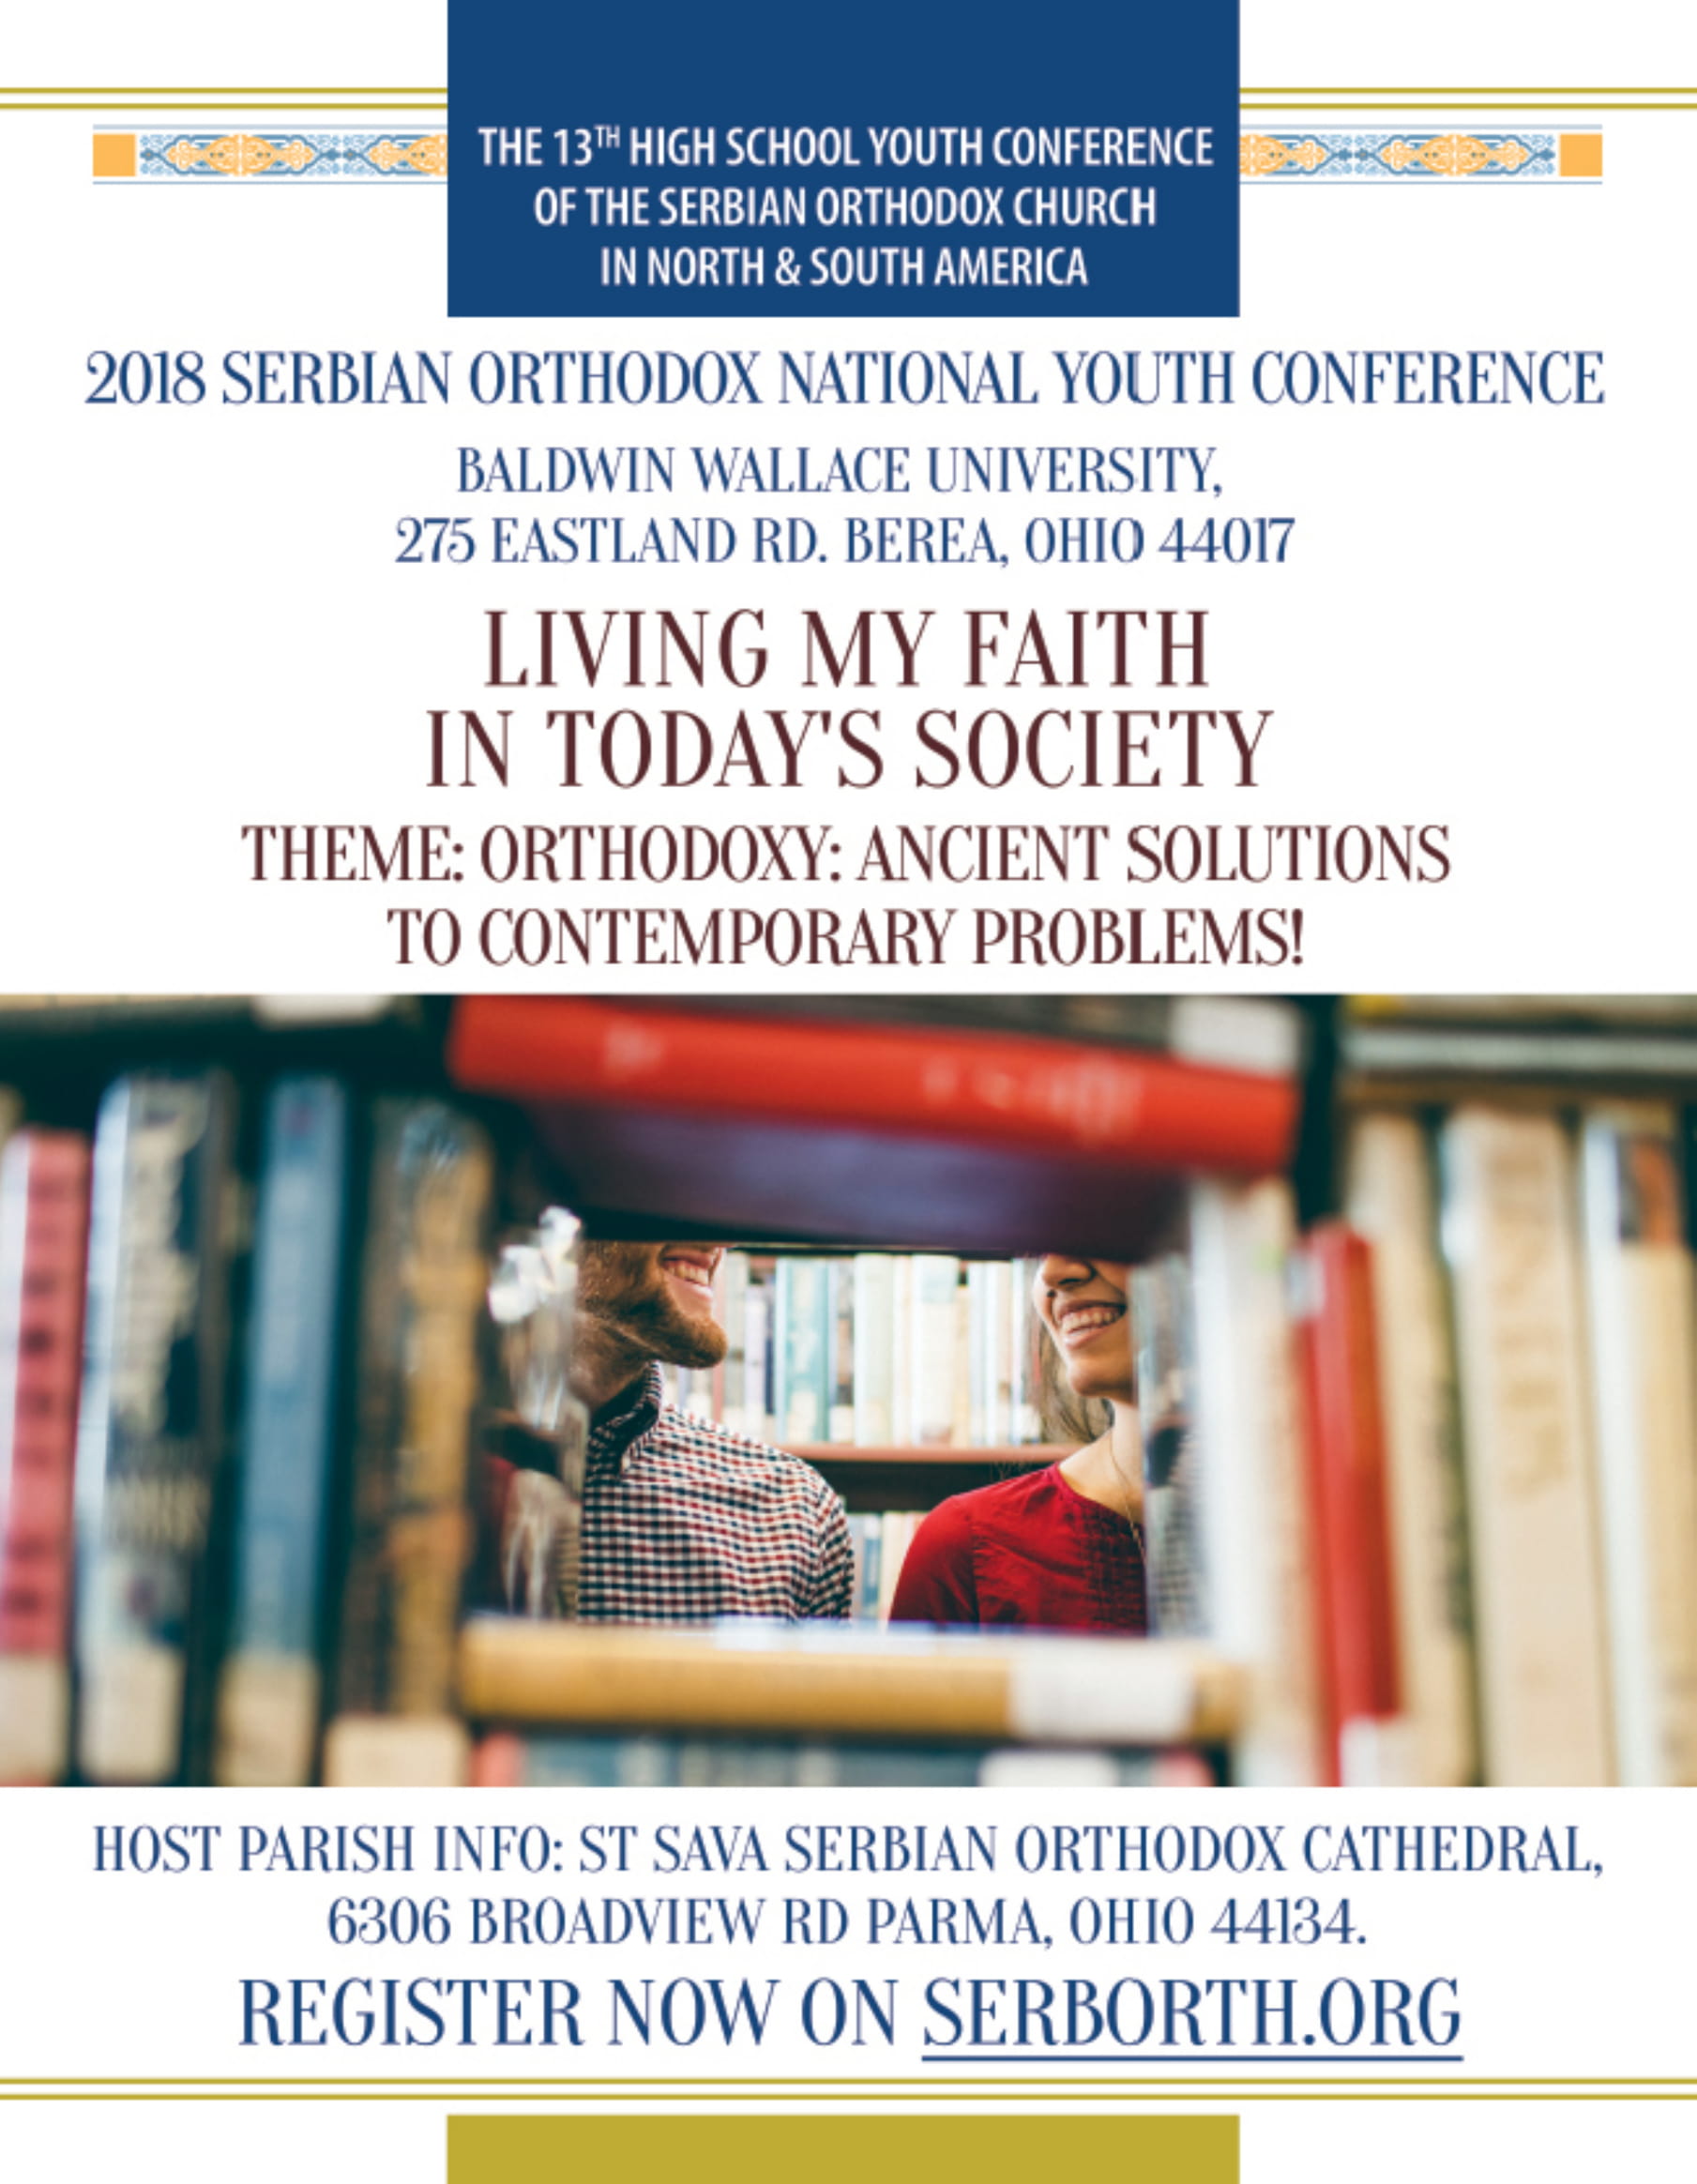 2018 Serbian Orthodox National Youth Conference – Ohio, June 20 – June 24, 2018